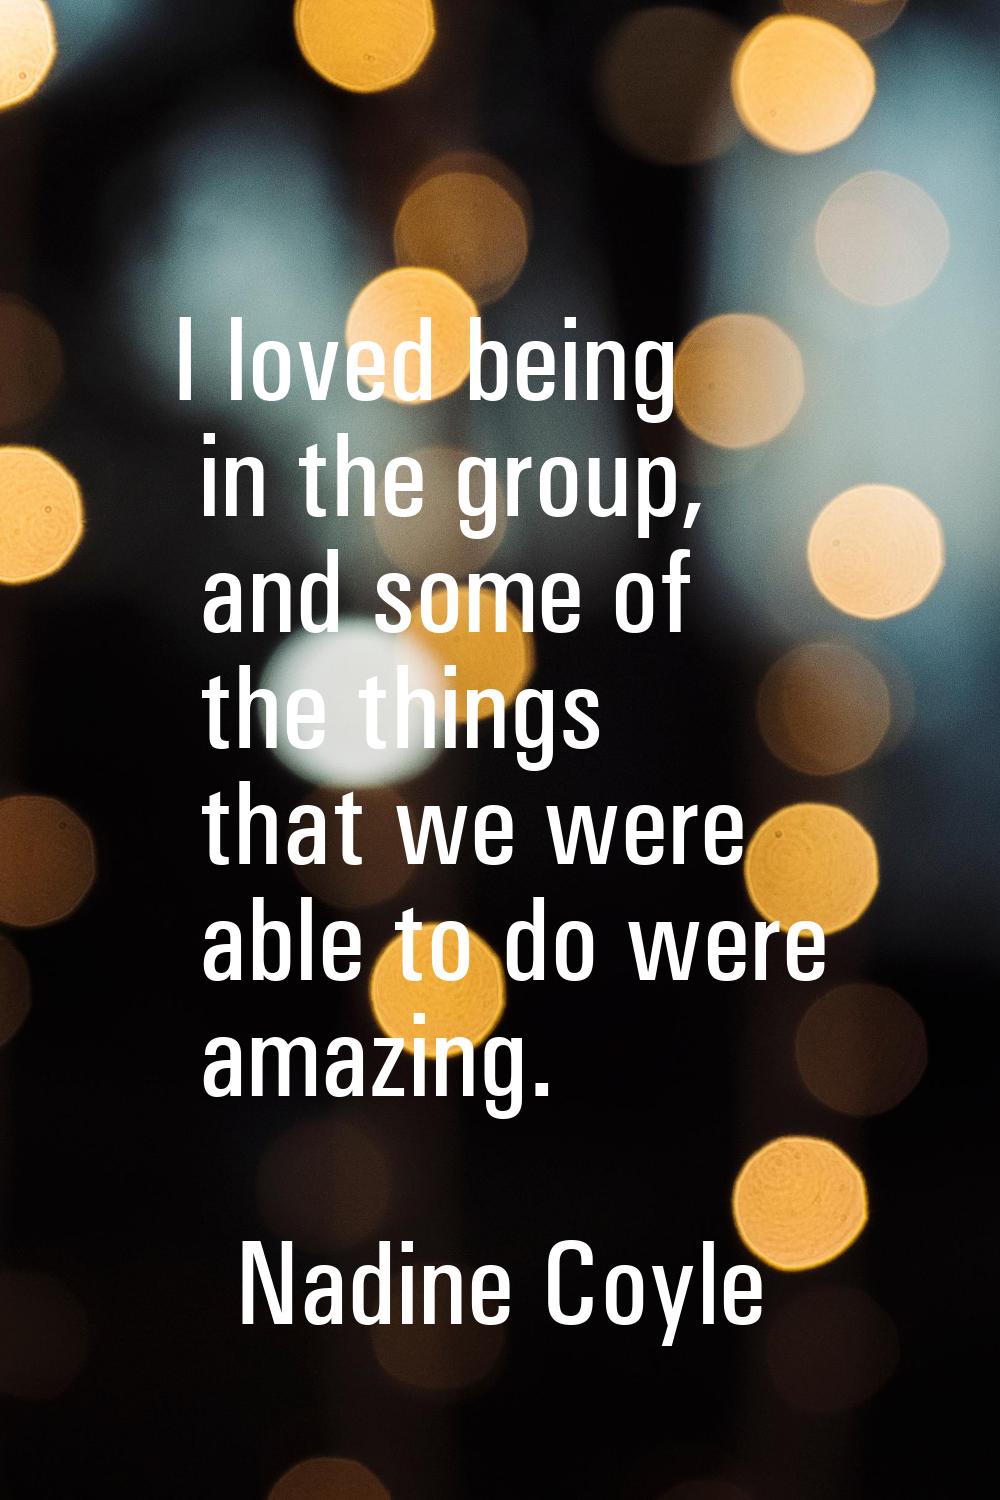 I loved being in the group, and some of the things that we were able to do were amazing.